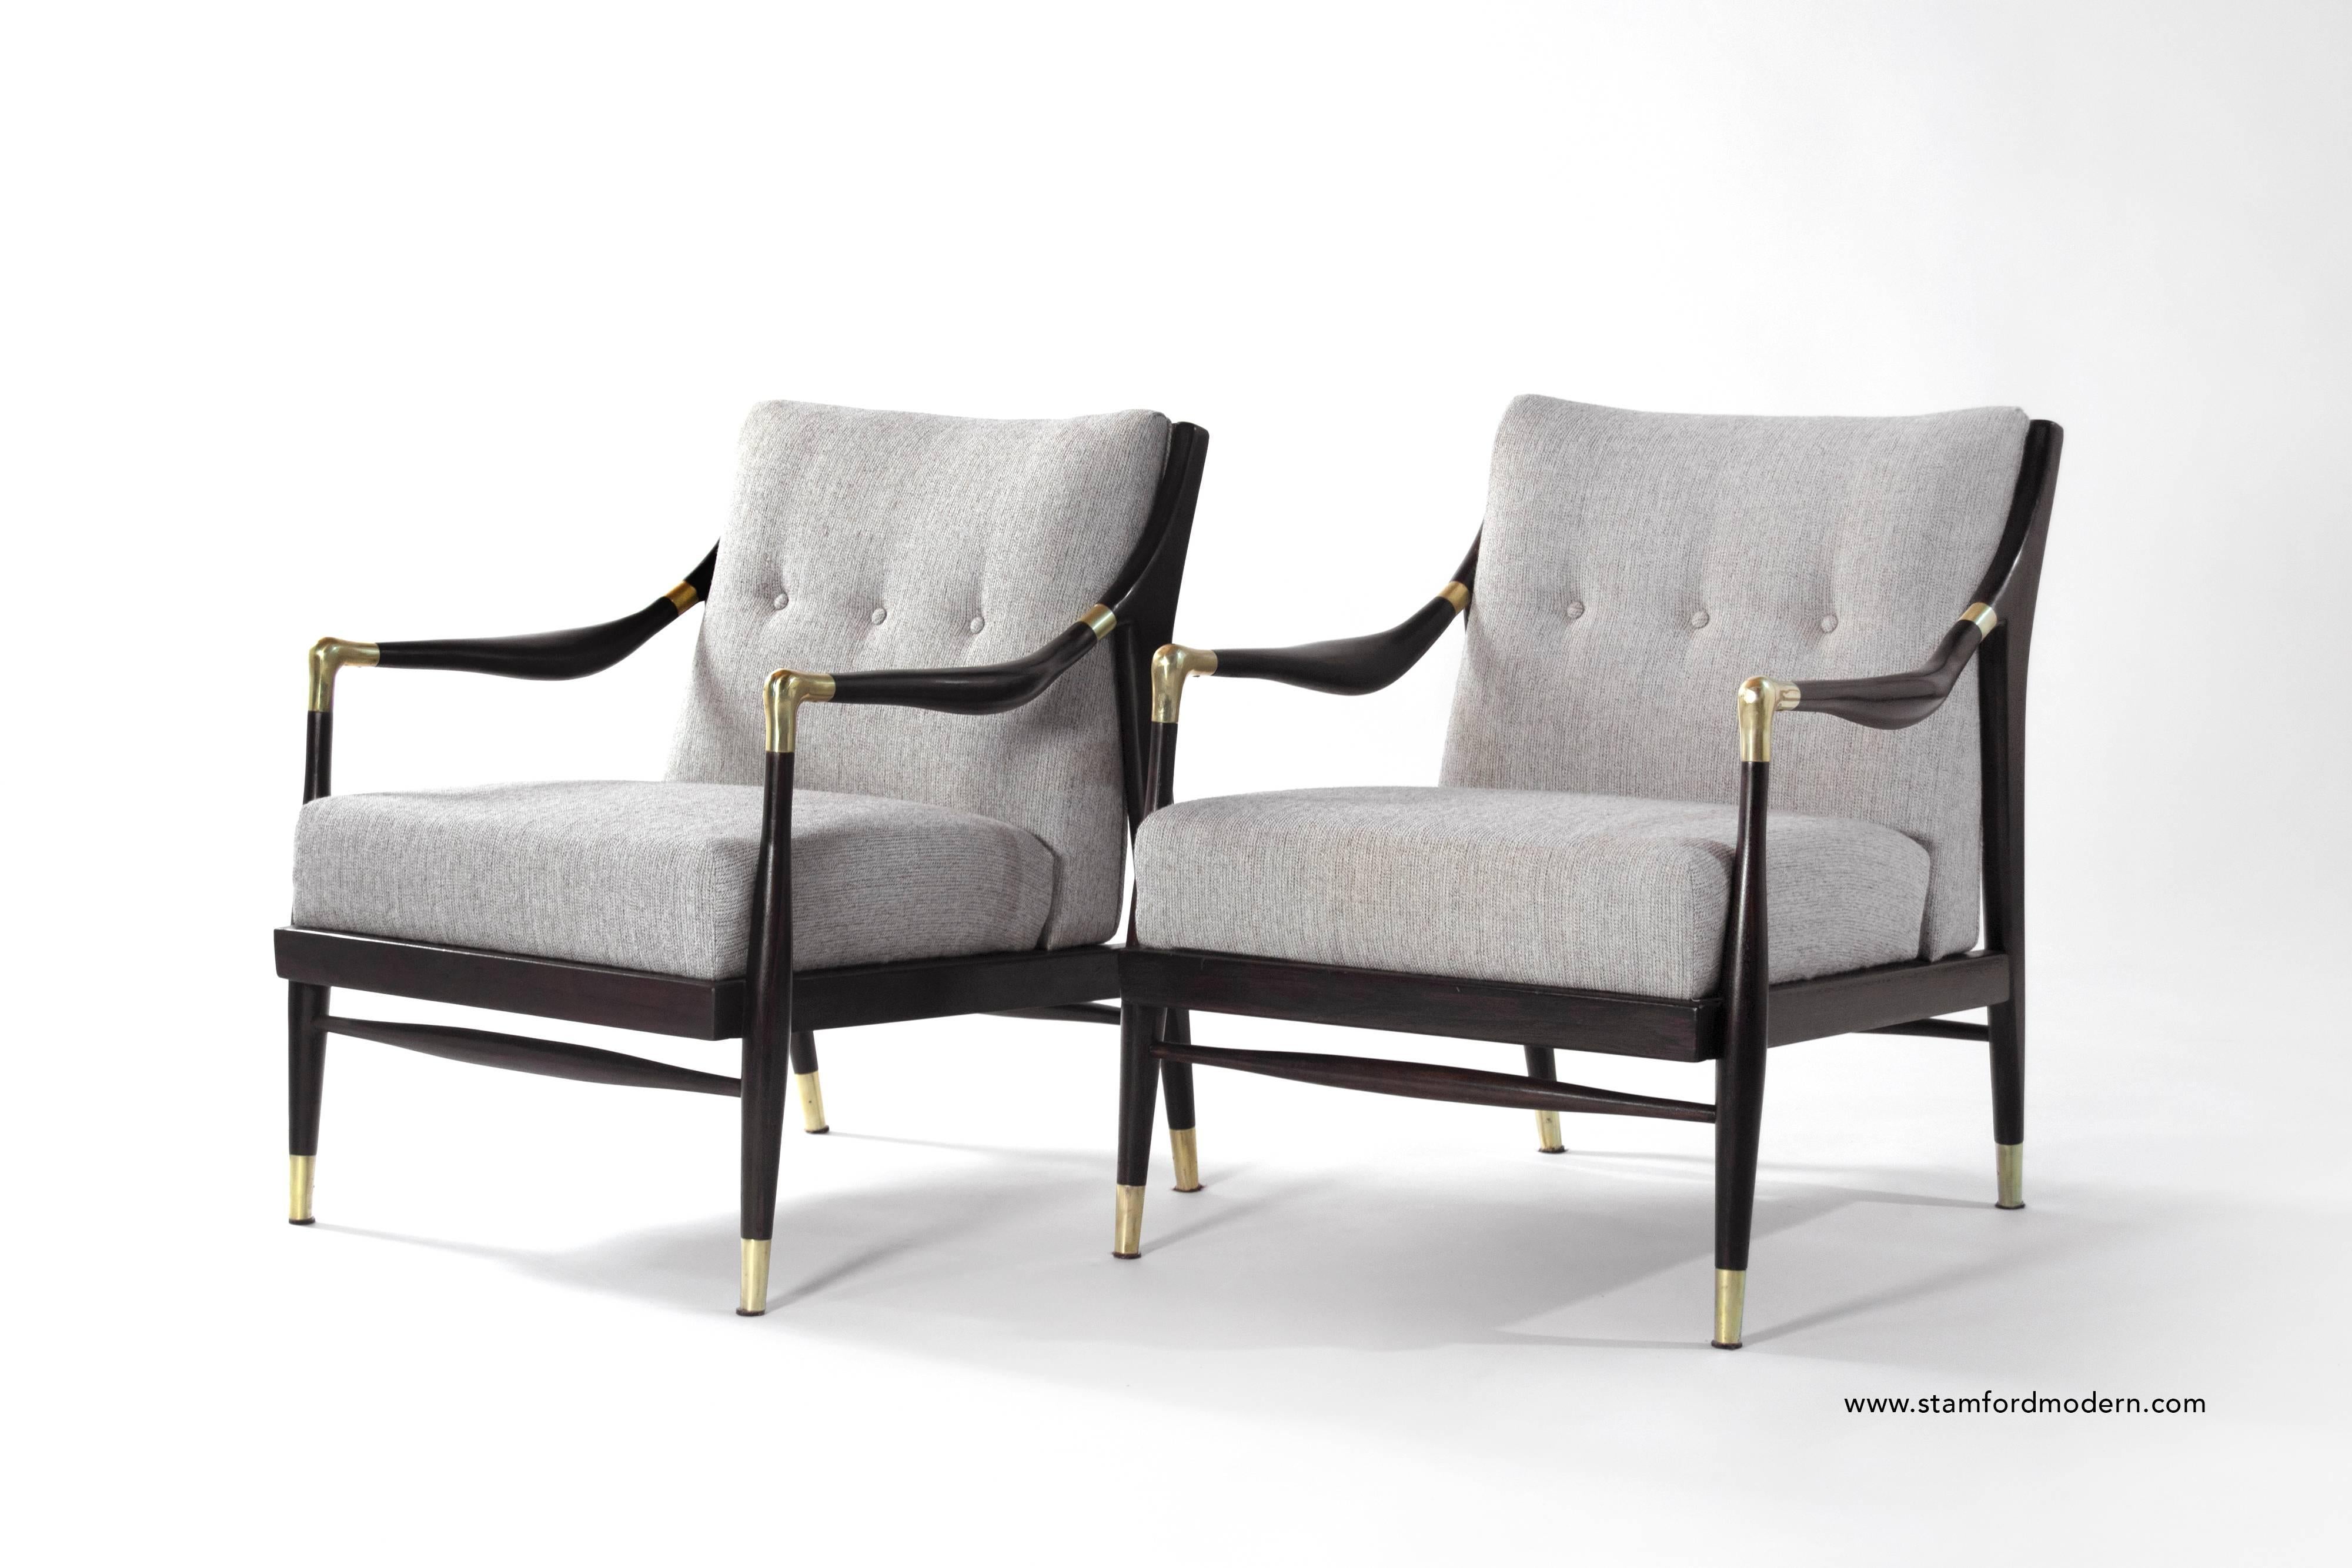 20th Century Pair of Sculptural Lounge Chairs in the Manner of Gio Ponti